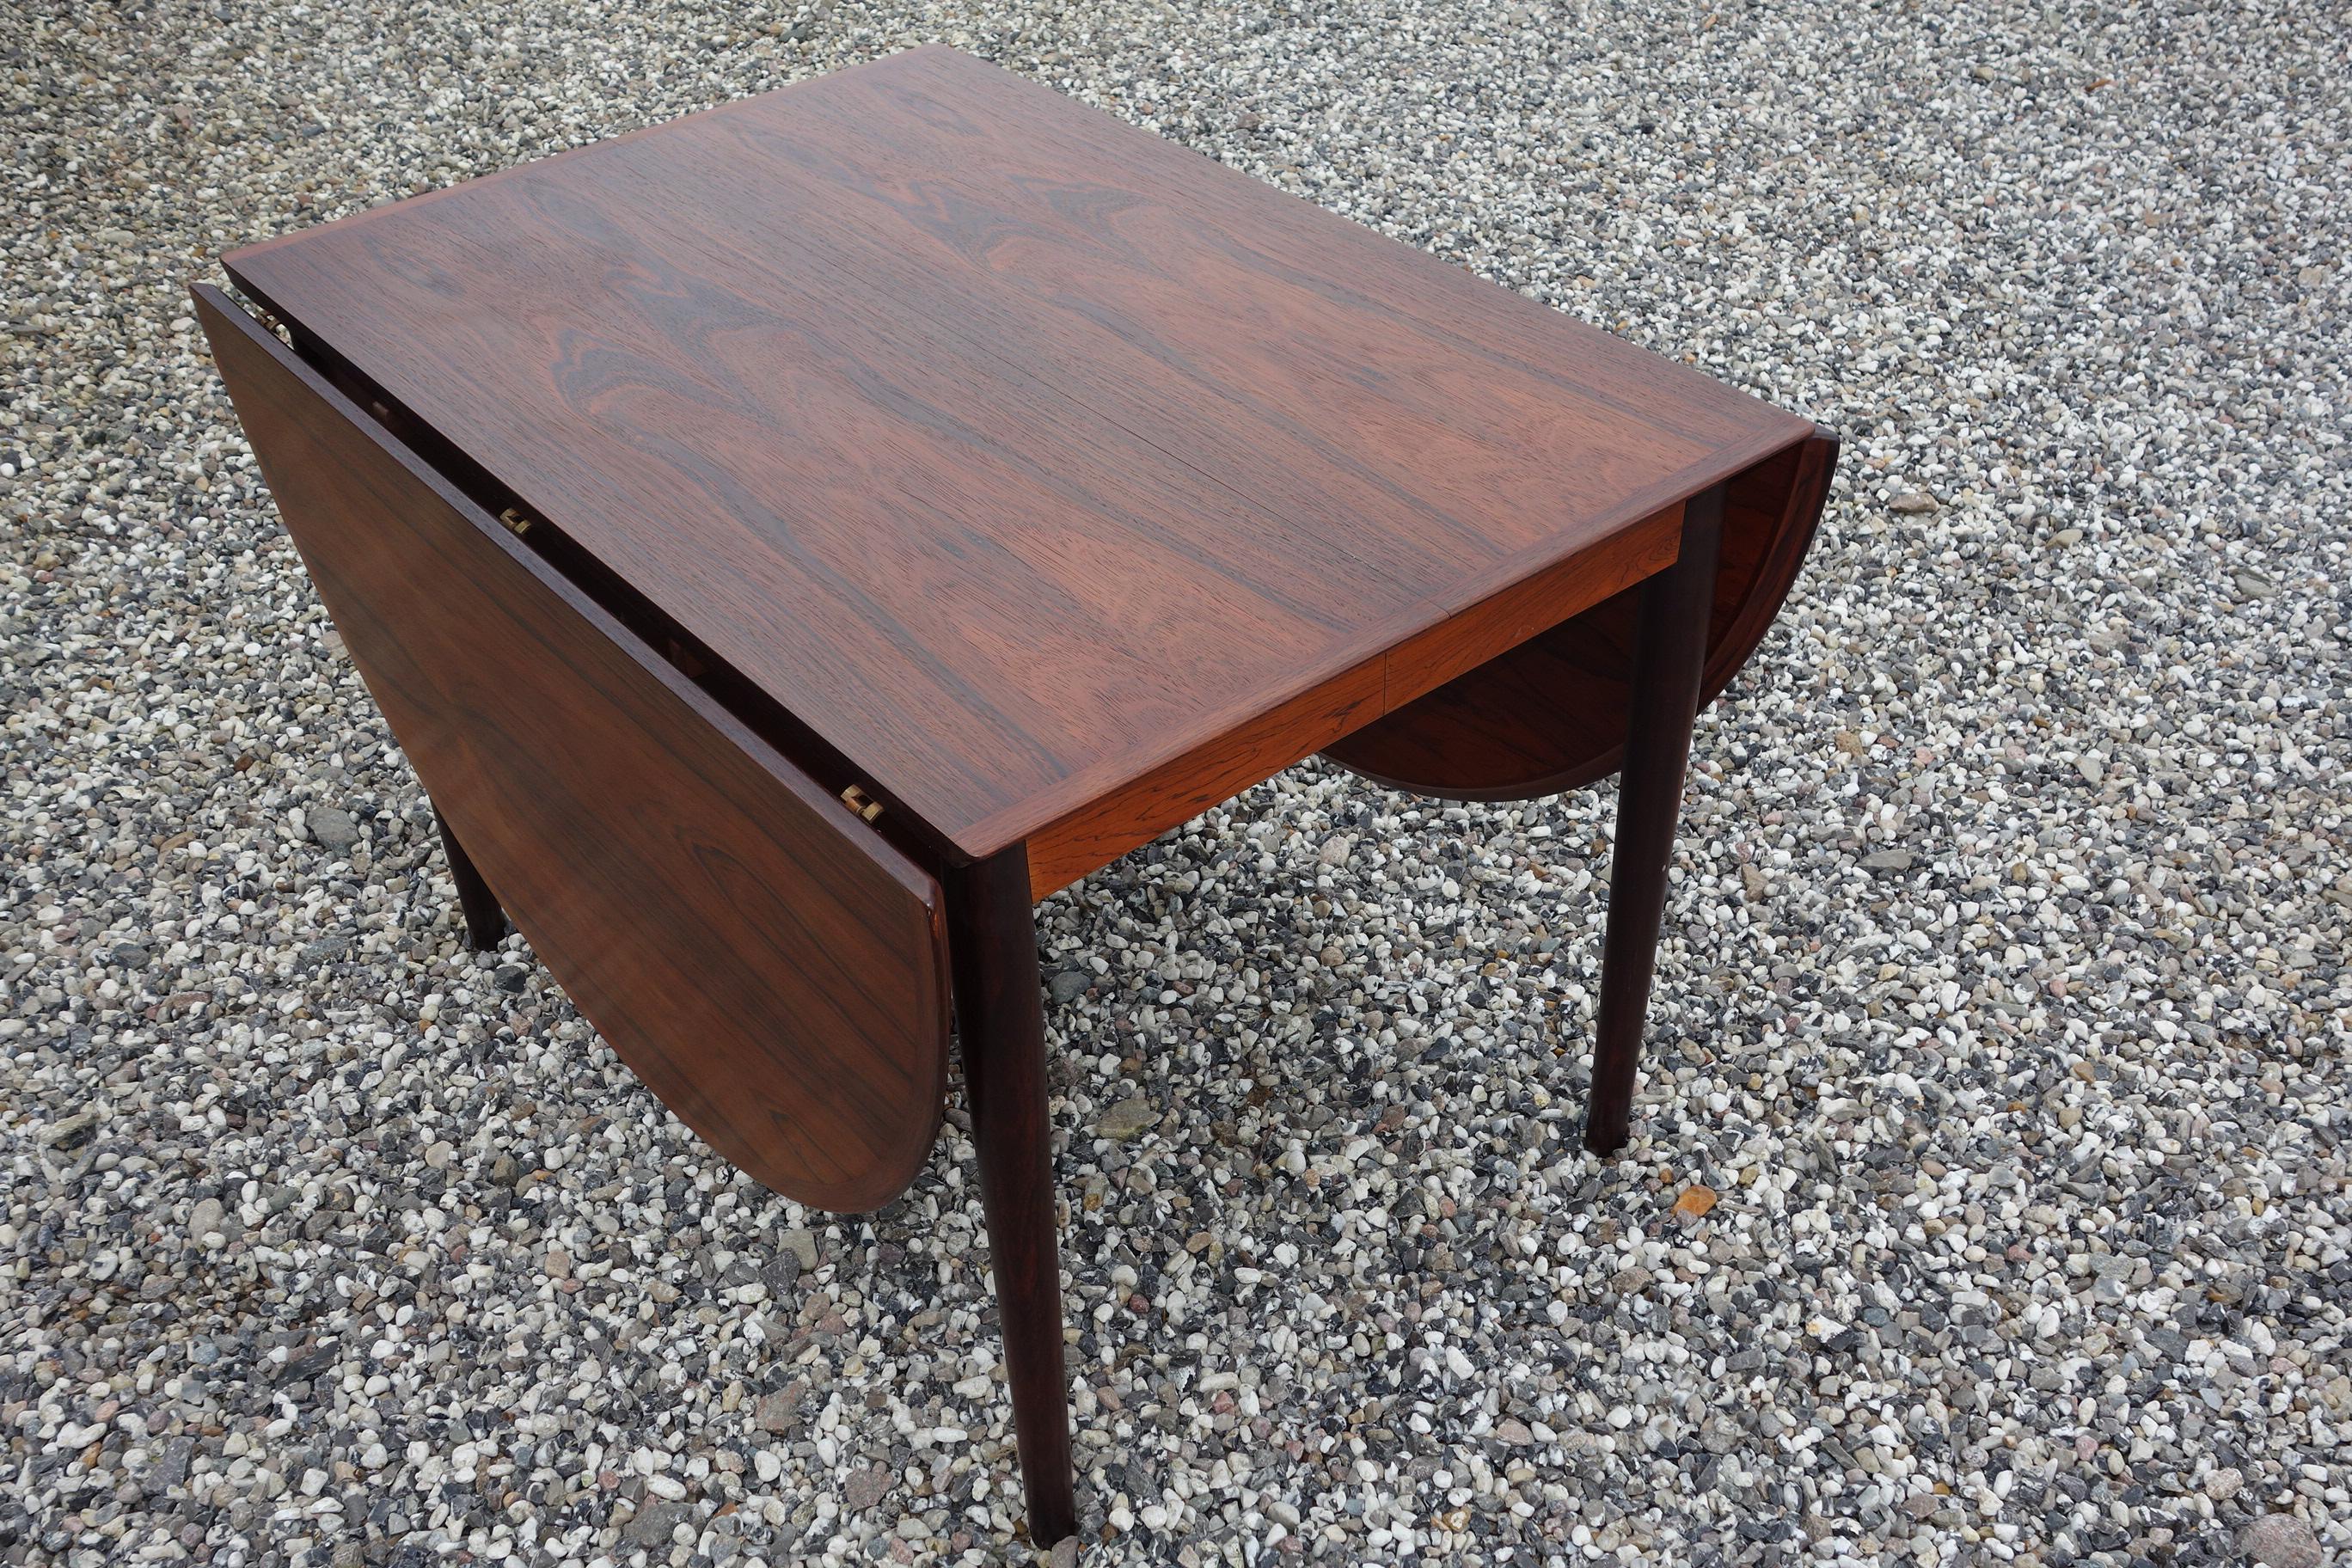 Arne Vodder. Dining table made of veneered rosewood with extension, fitted with semi-circular flaps on each side, 1 additional plate with sash included. Round tapered legs. Produced by Sibast Furniture, model 227. Measures: H. 72 cm., B. 106 cm., L.